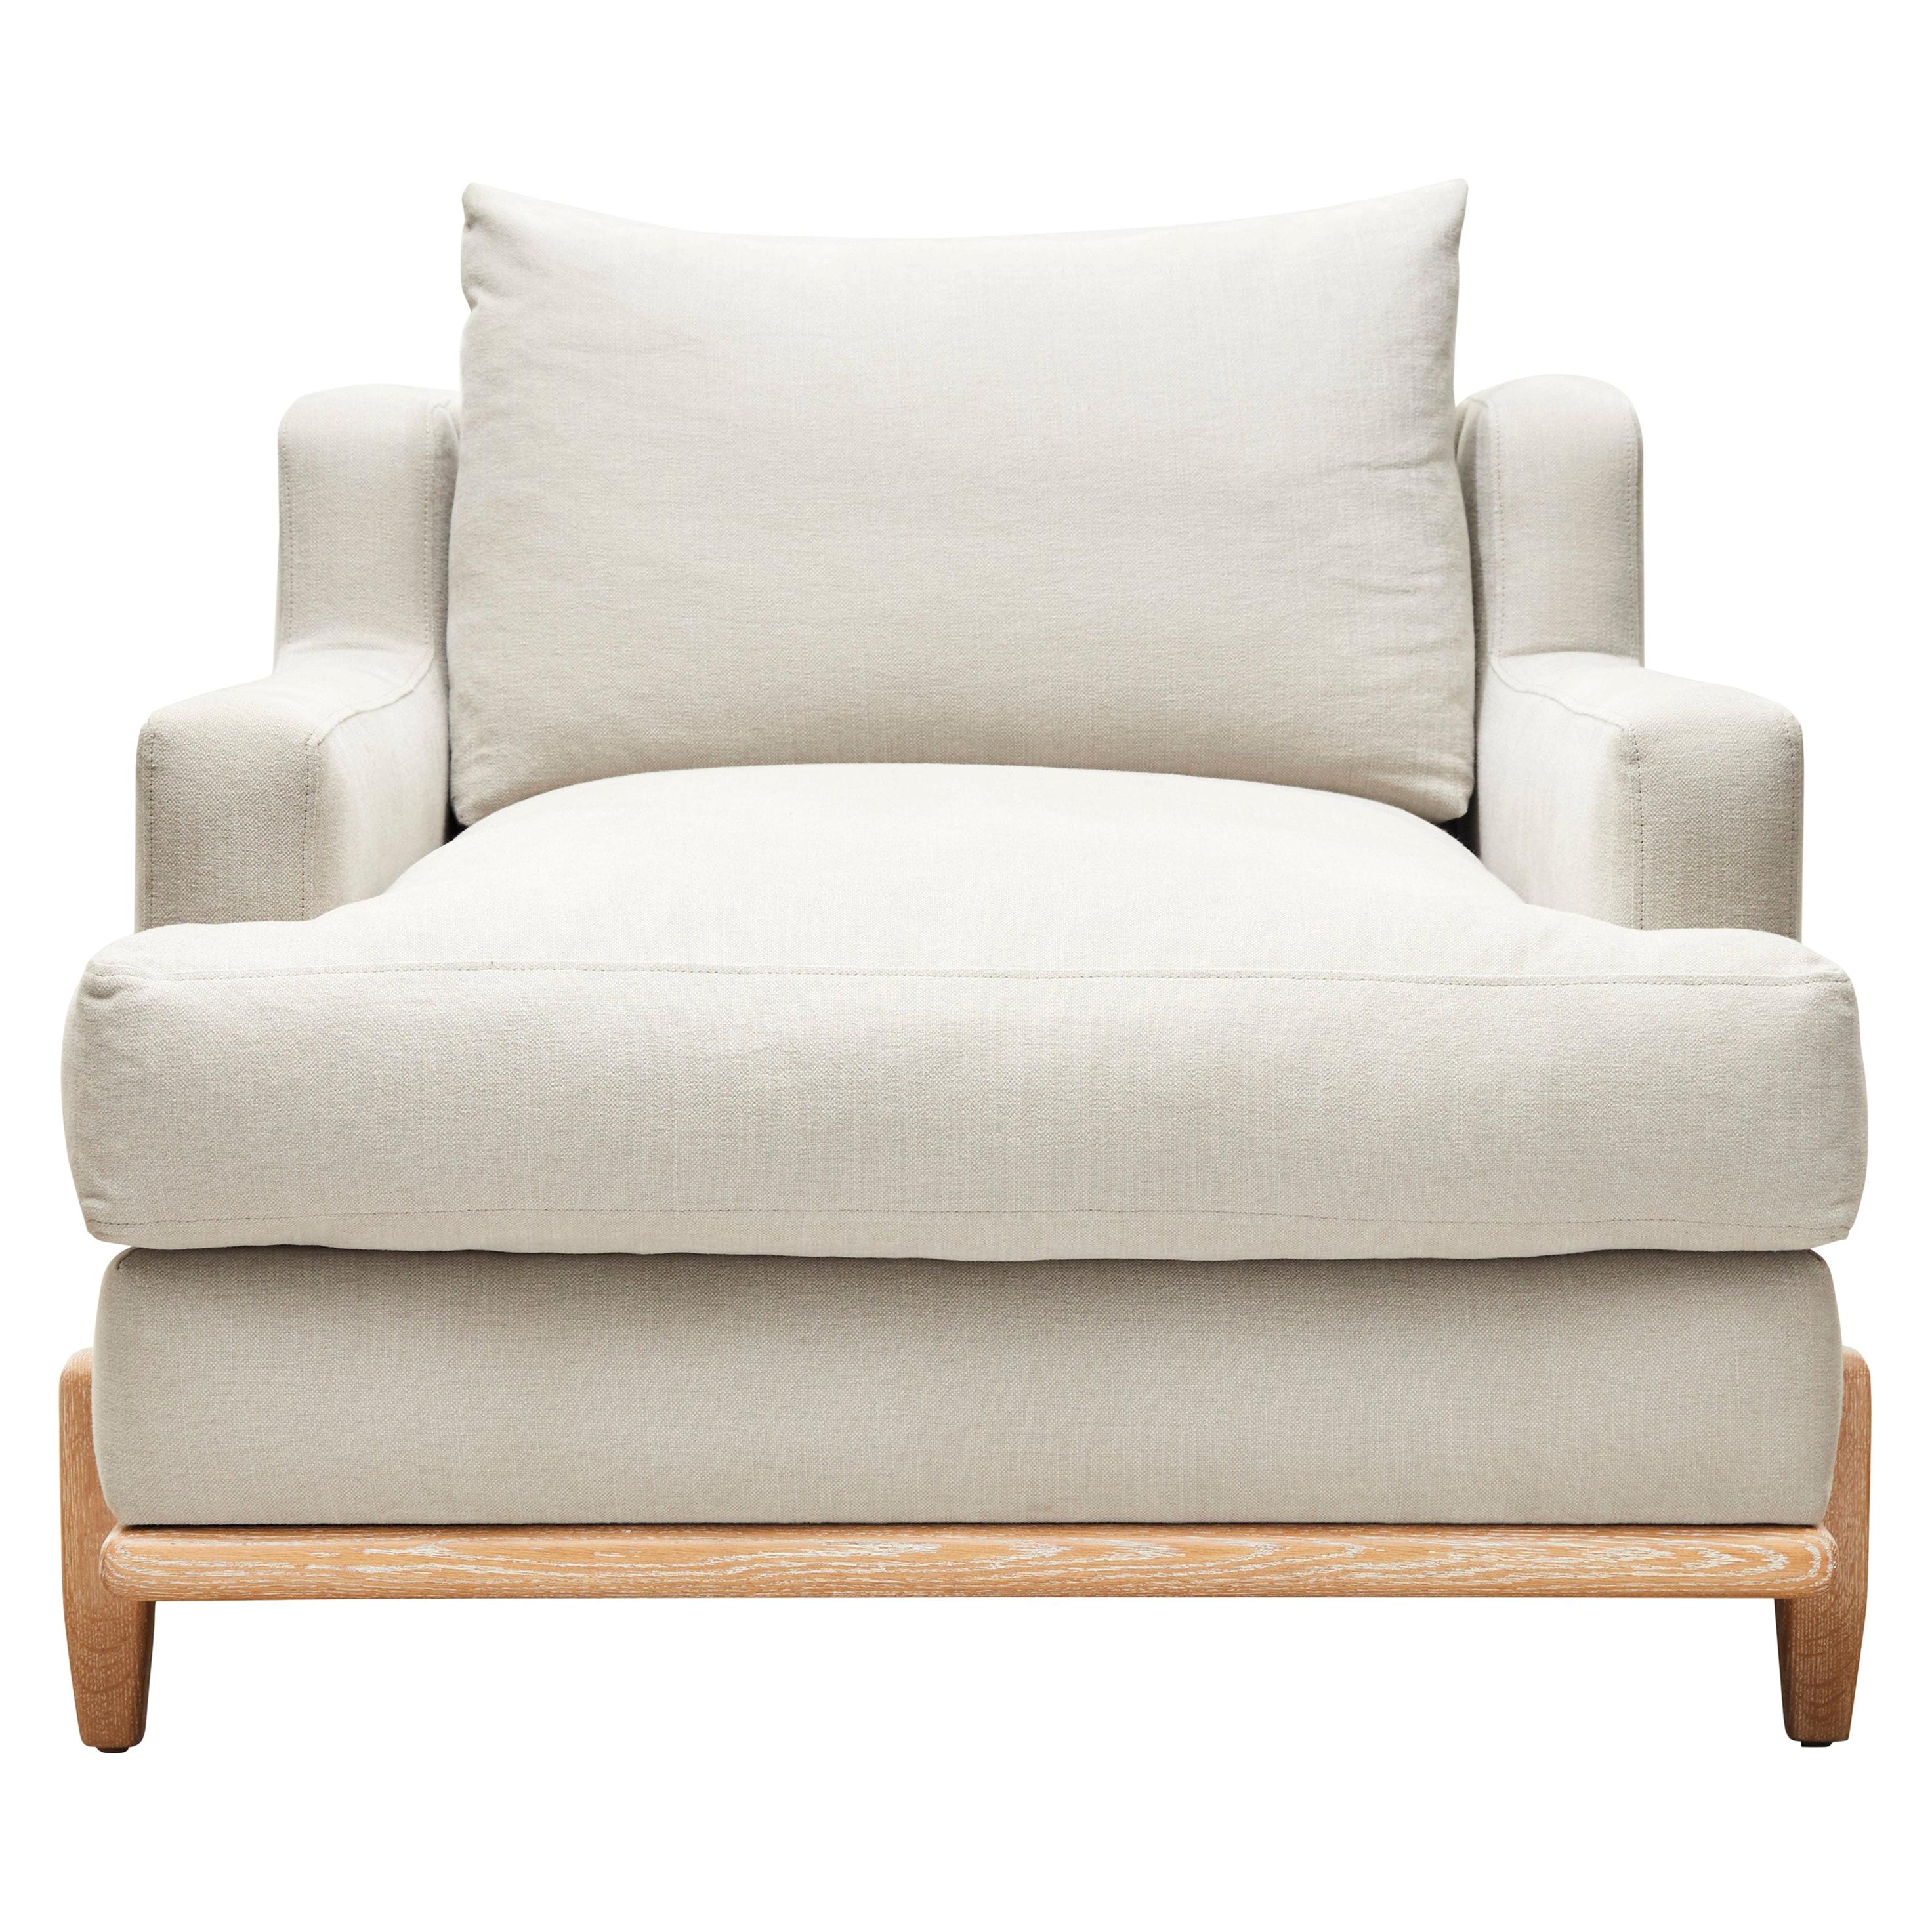 White Linen and Oak George Chair by Brian Paquette for Lawson-Fenning